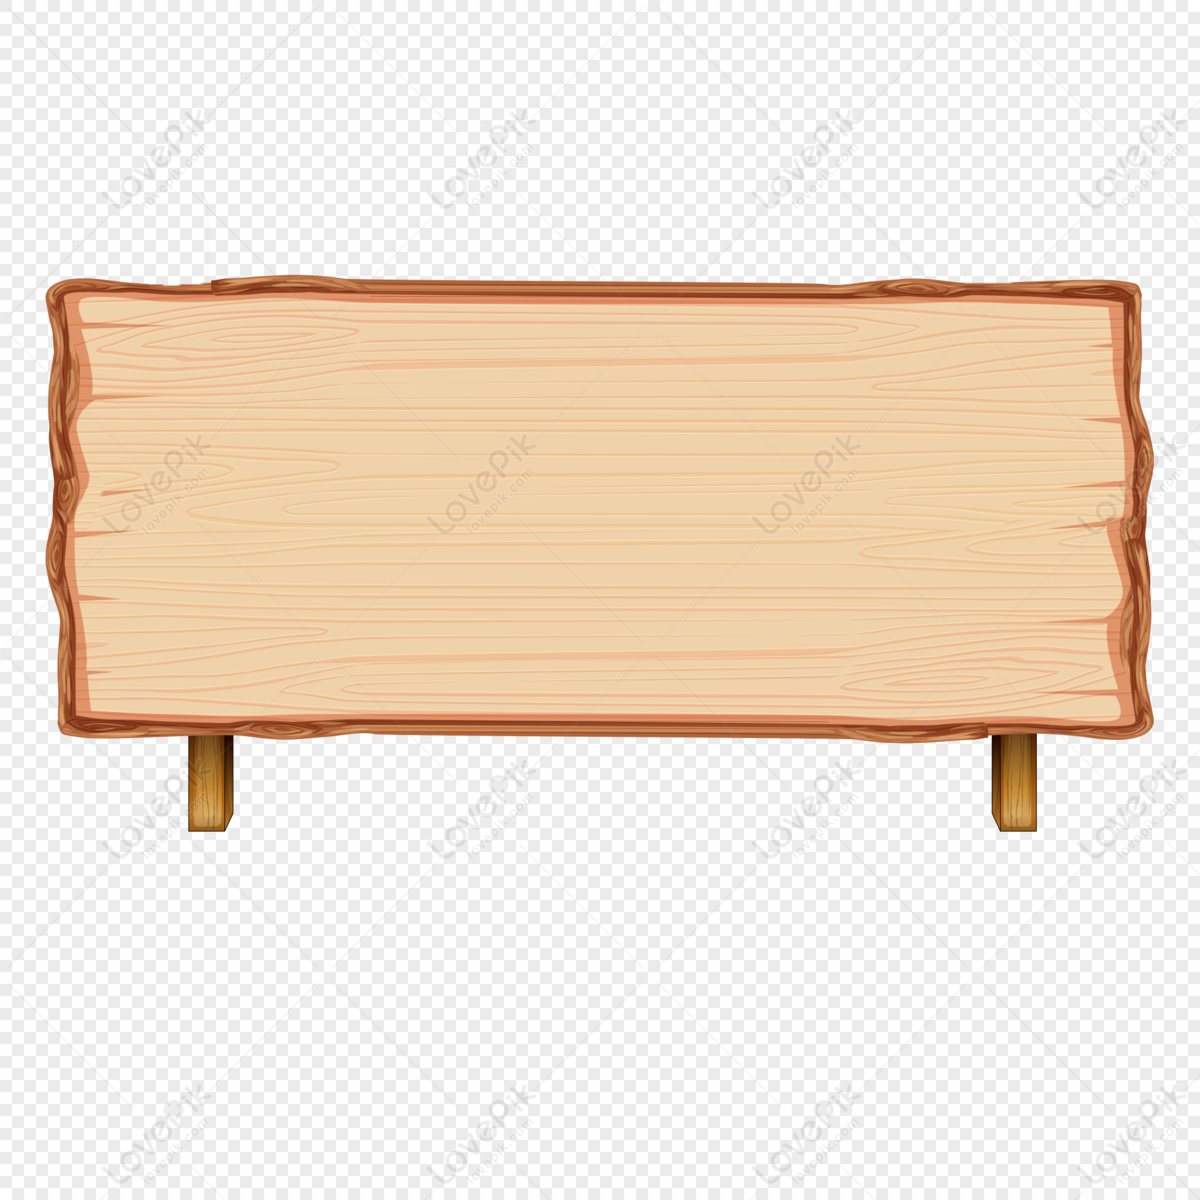 Wood Bulletin Boards PNG Images With Transparent Background | Free ...